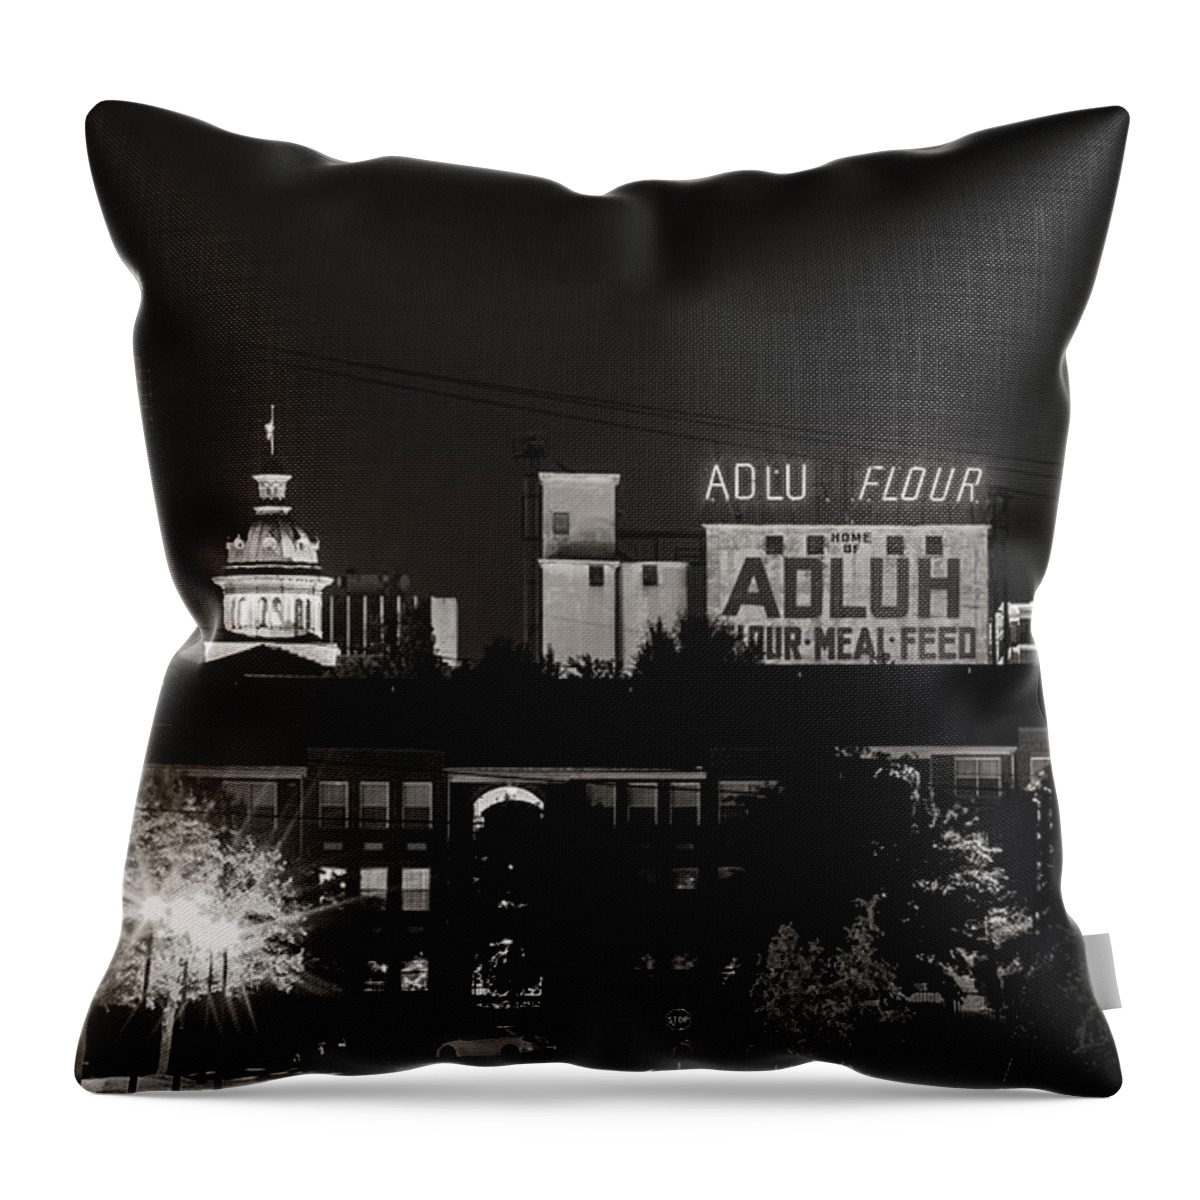 Columbia Throw Pillow featuring the photograph ADLUH Flour B-W by Charles Hite